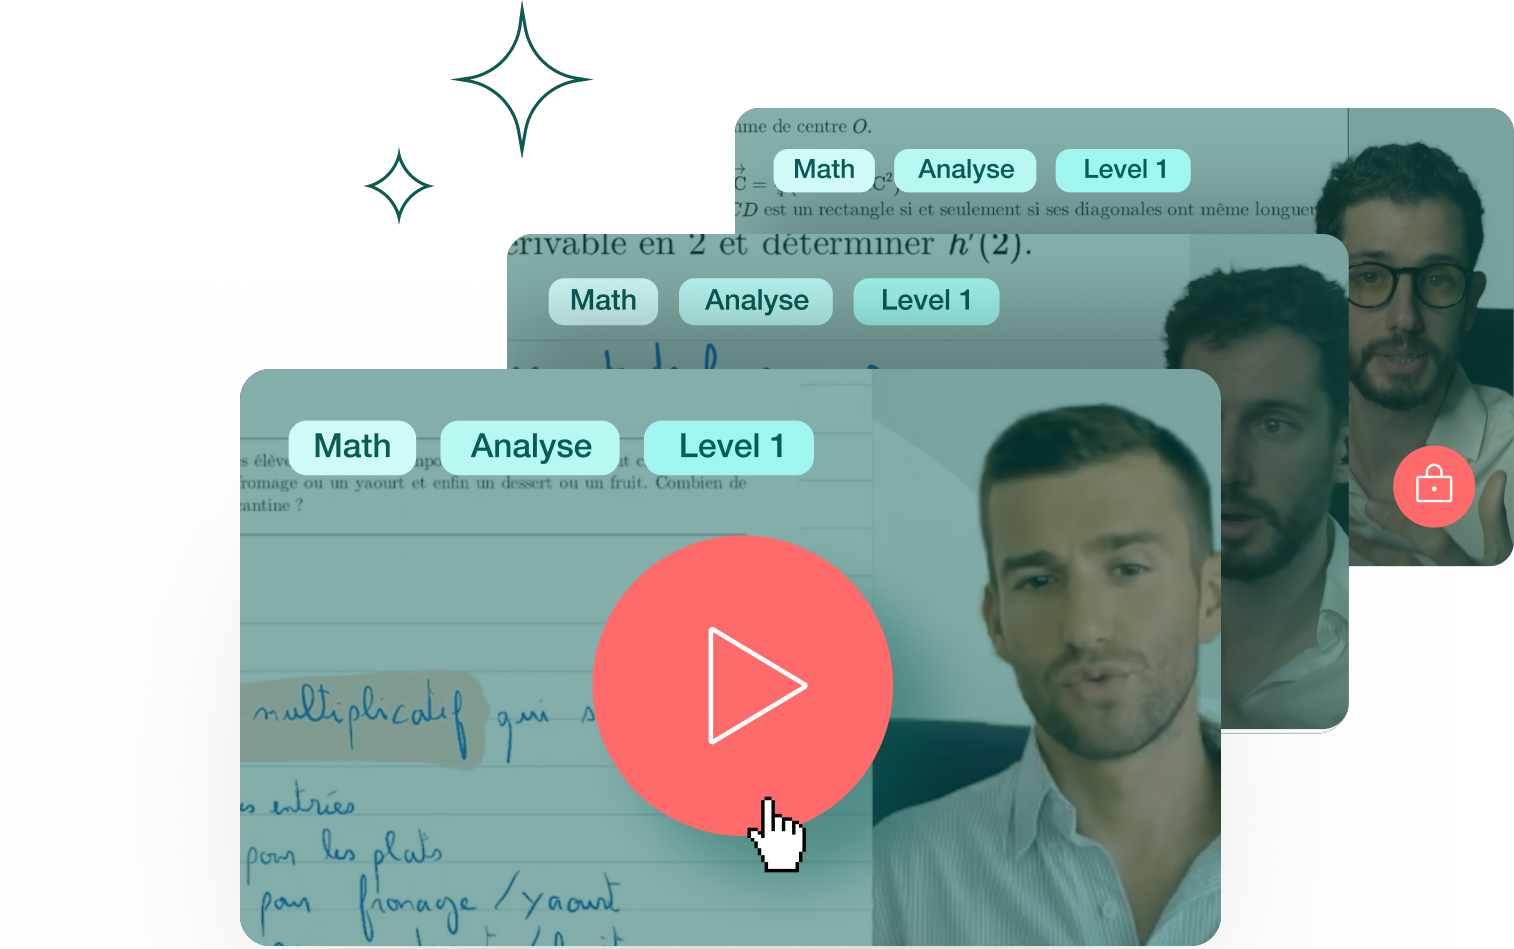 Dive into the heart of learning with our exclusive educational videos. Each chapter of the mathematics and physics program comes to life through clear explanations and concrete examples. Elevate your skills now!